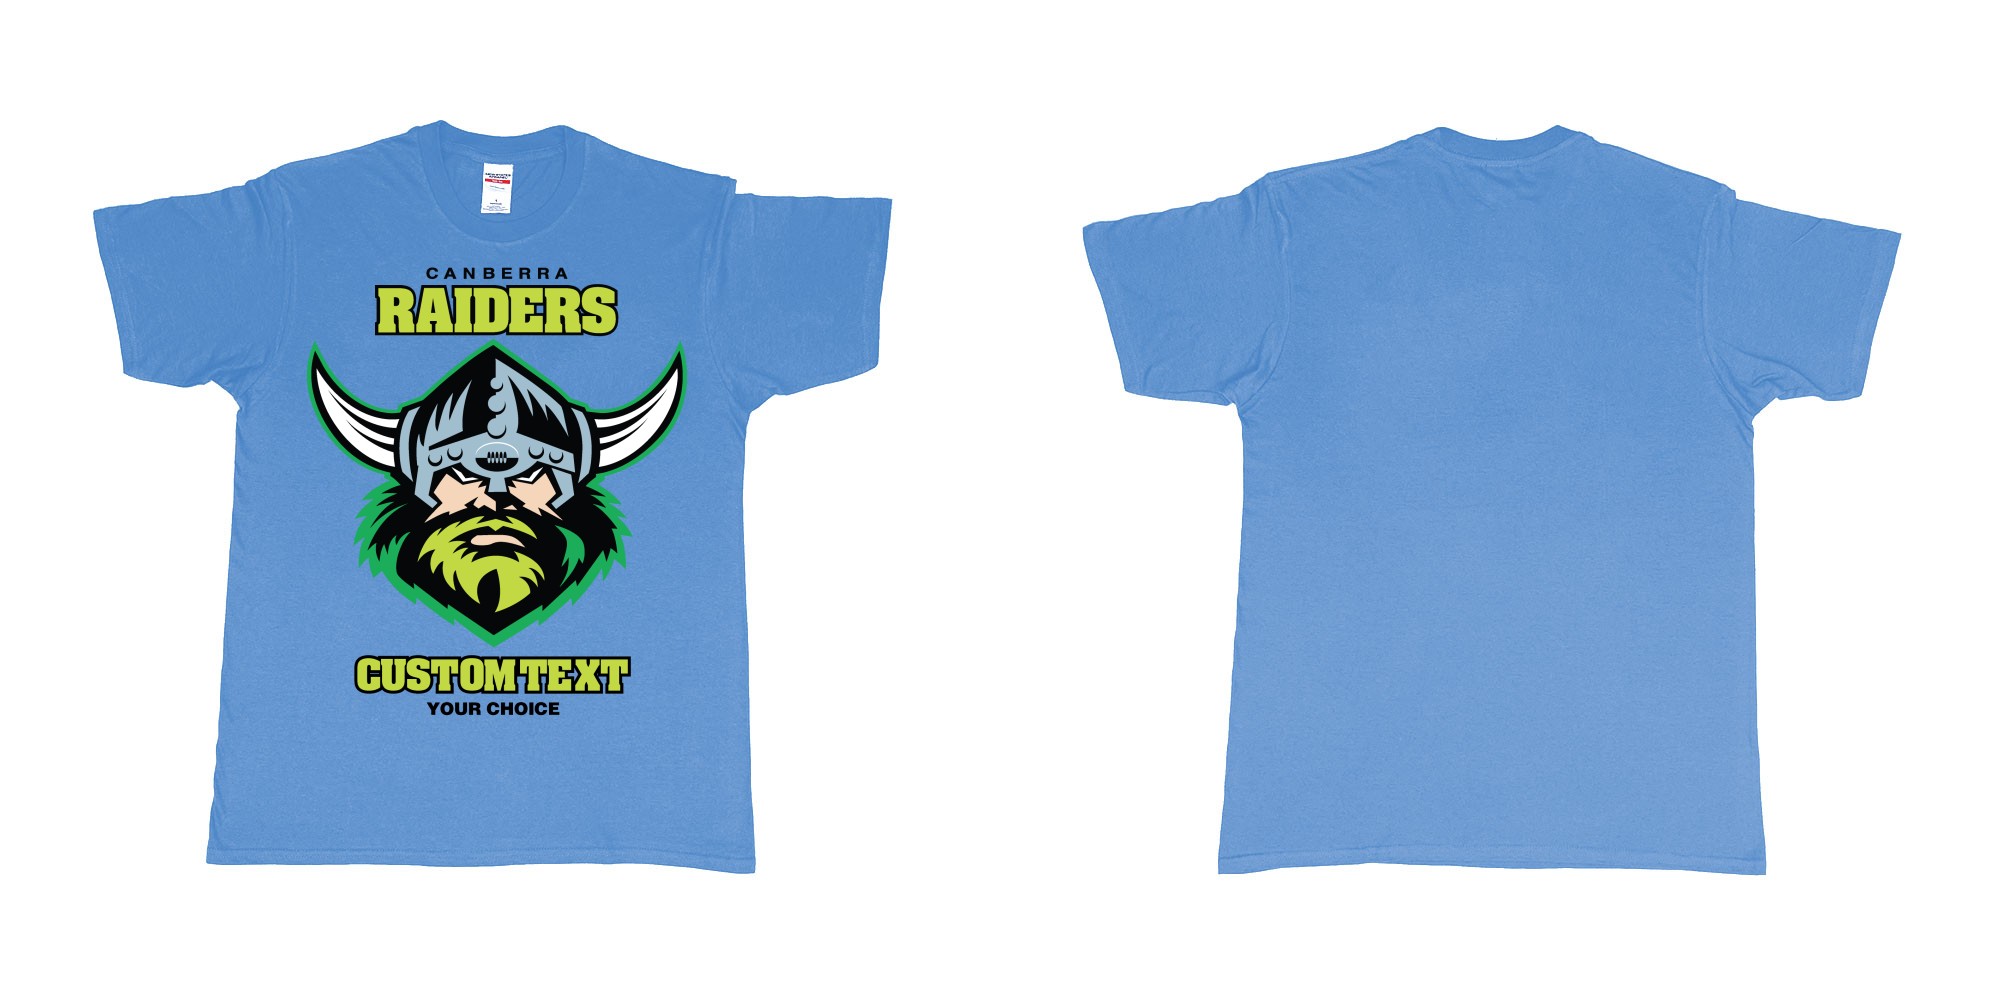 Custom tshirt design canberra raiders nrl logo own printed text near you in fabric color carolina-blue choice your own text made in Bali by The Pirate Way